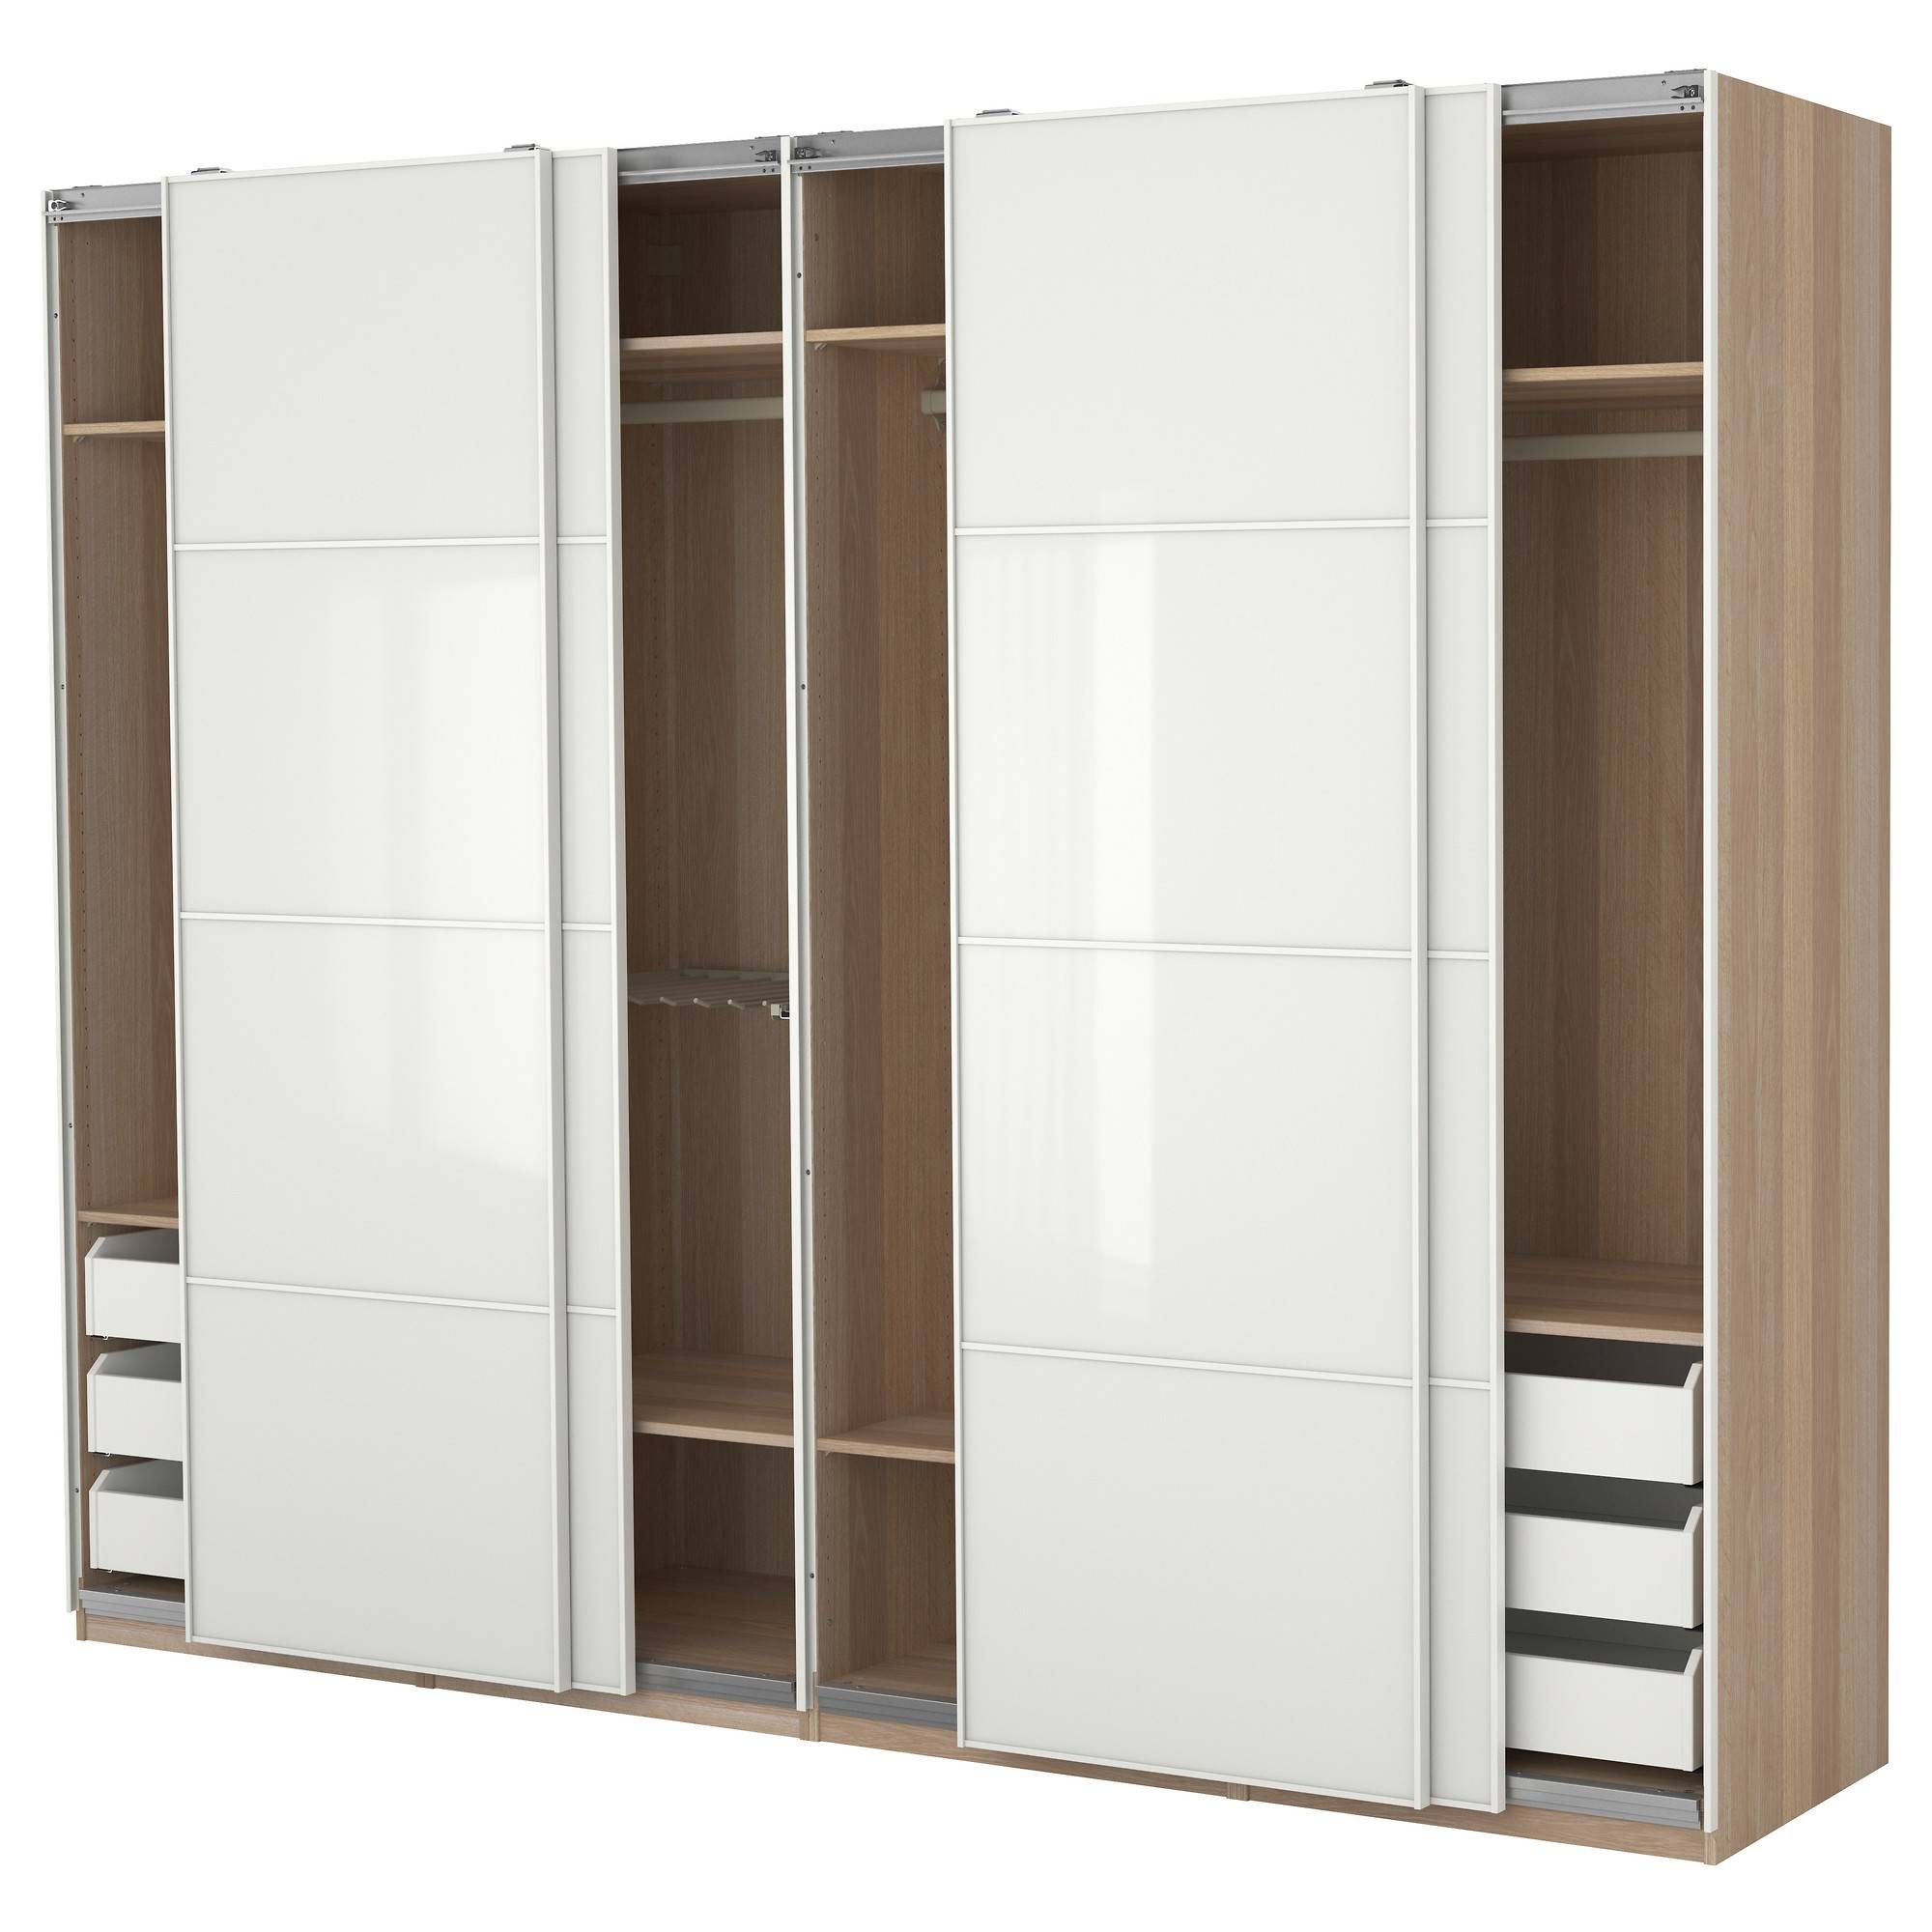 Fitted Modern Living Room Wardrobe Closed Made Of Wooden In Light Pertaining To Solid Wood Fitted Wardrobe Doors (View 26 of 30)